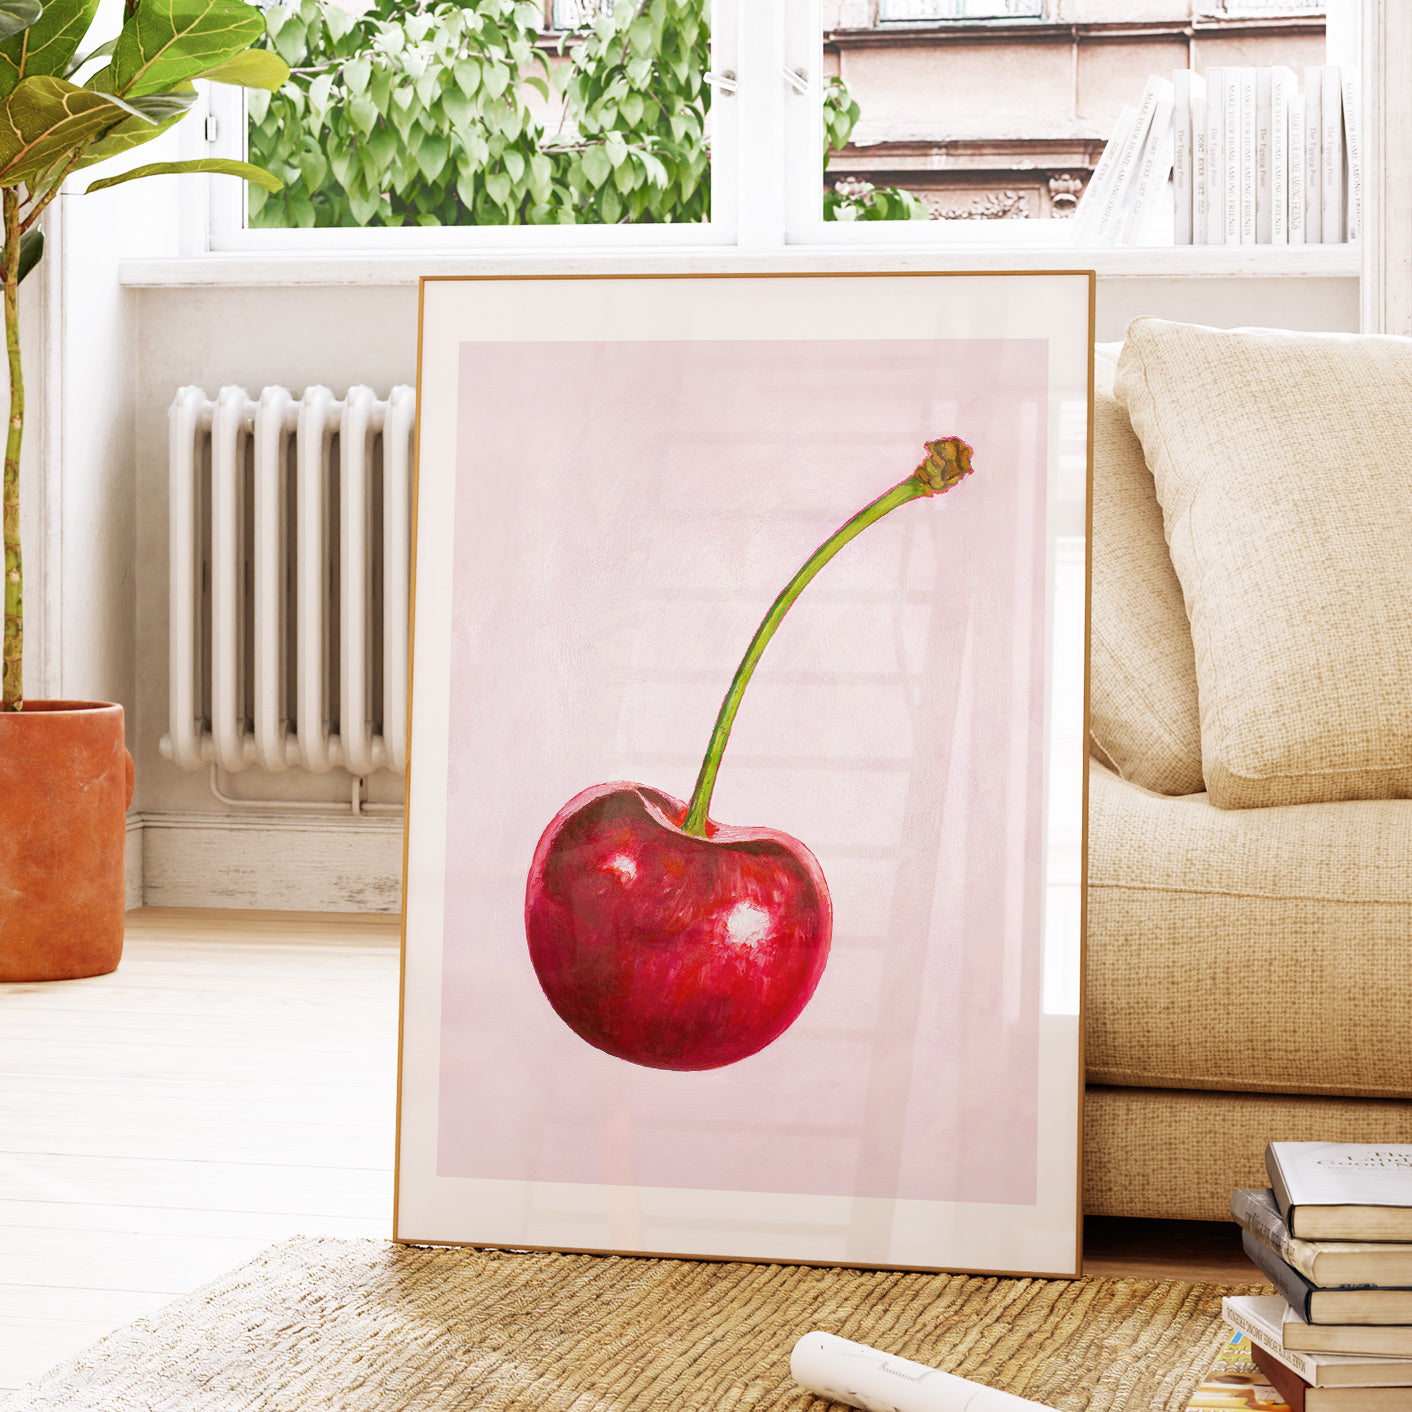 a picture of a cherry on a table next to a couch